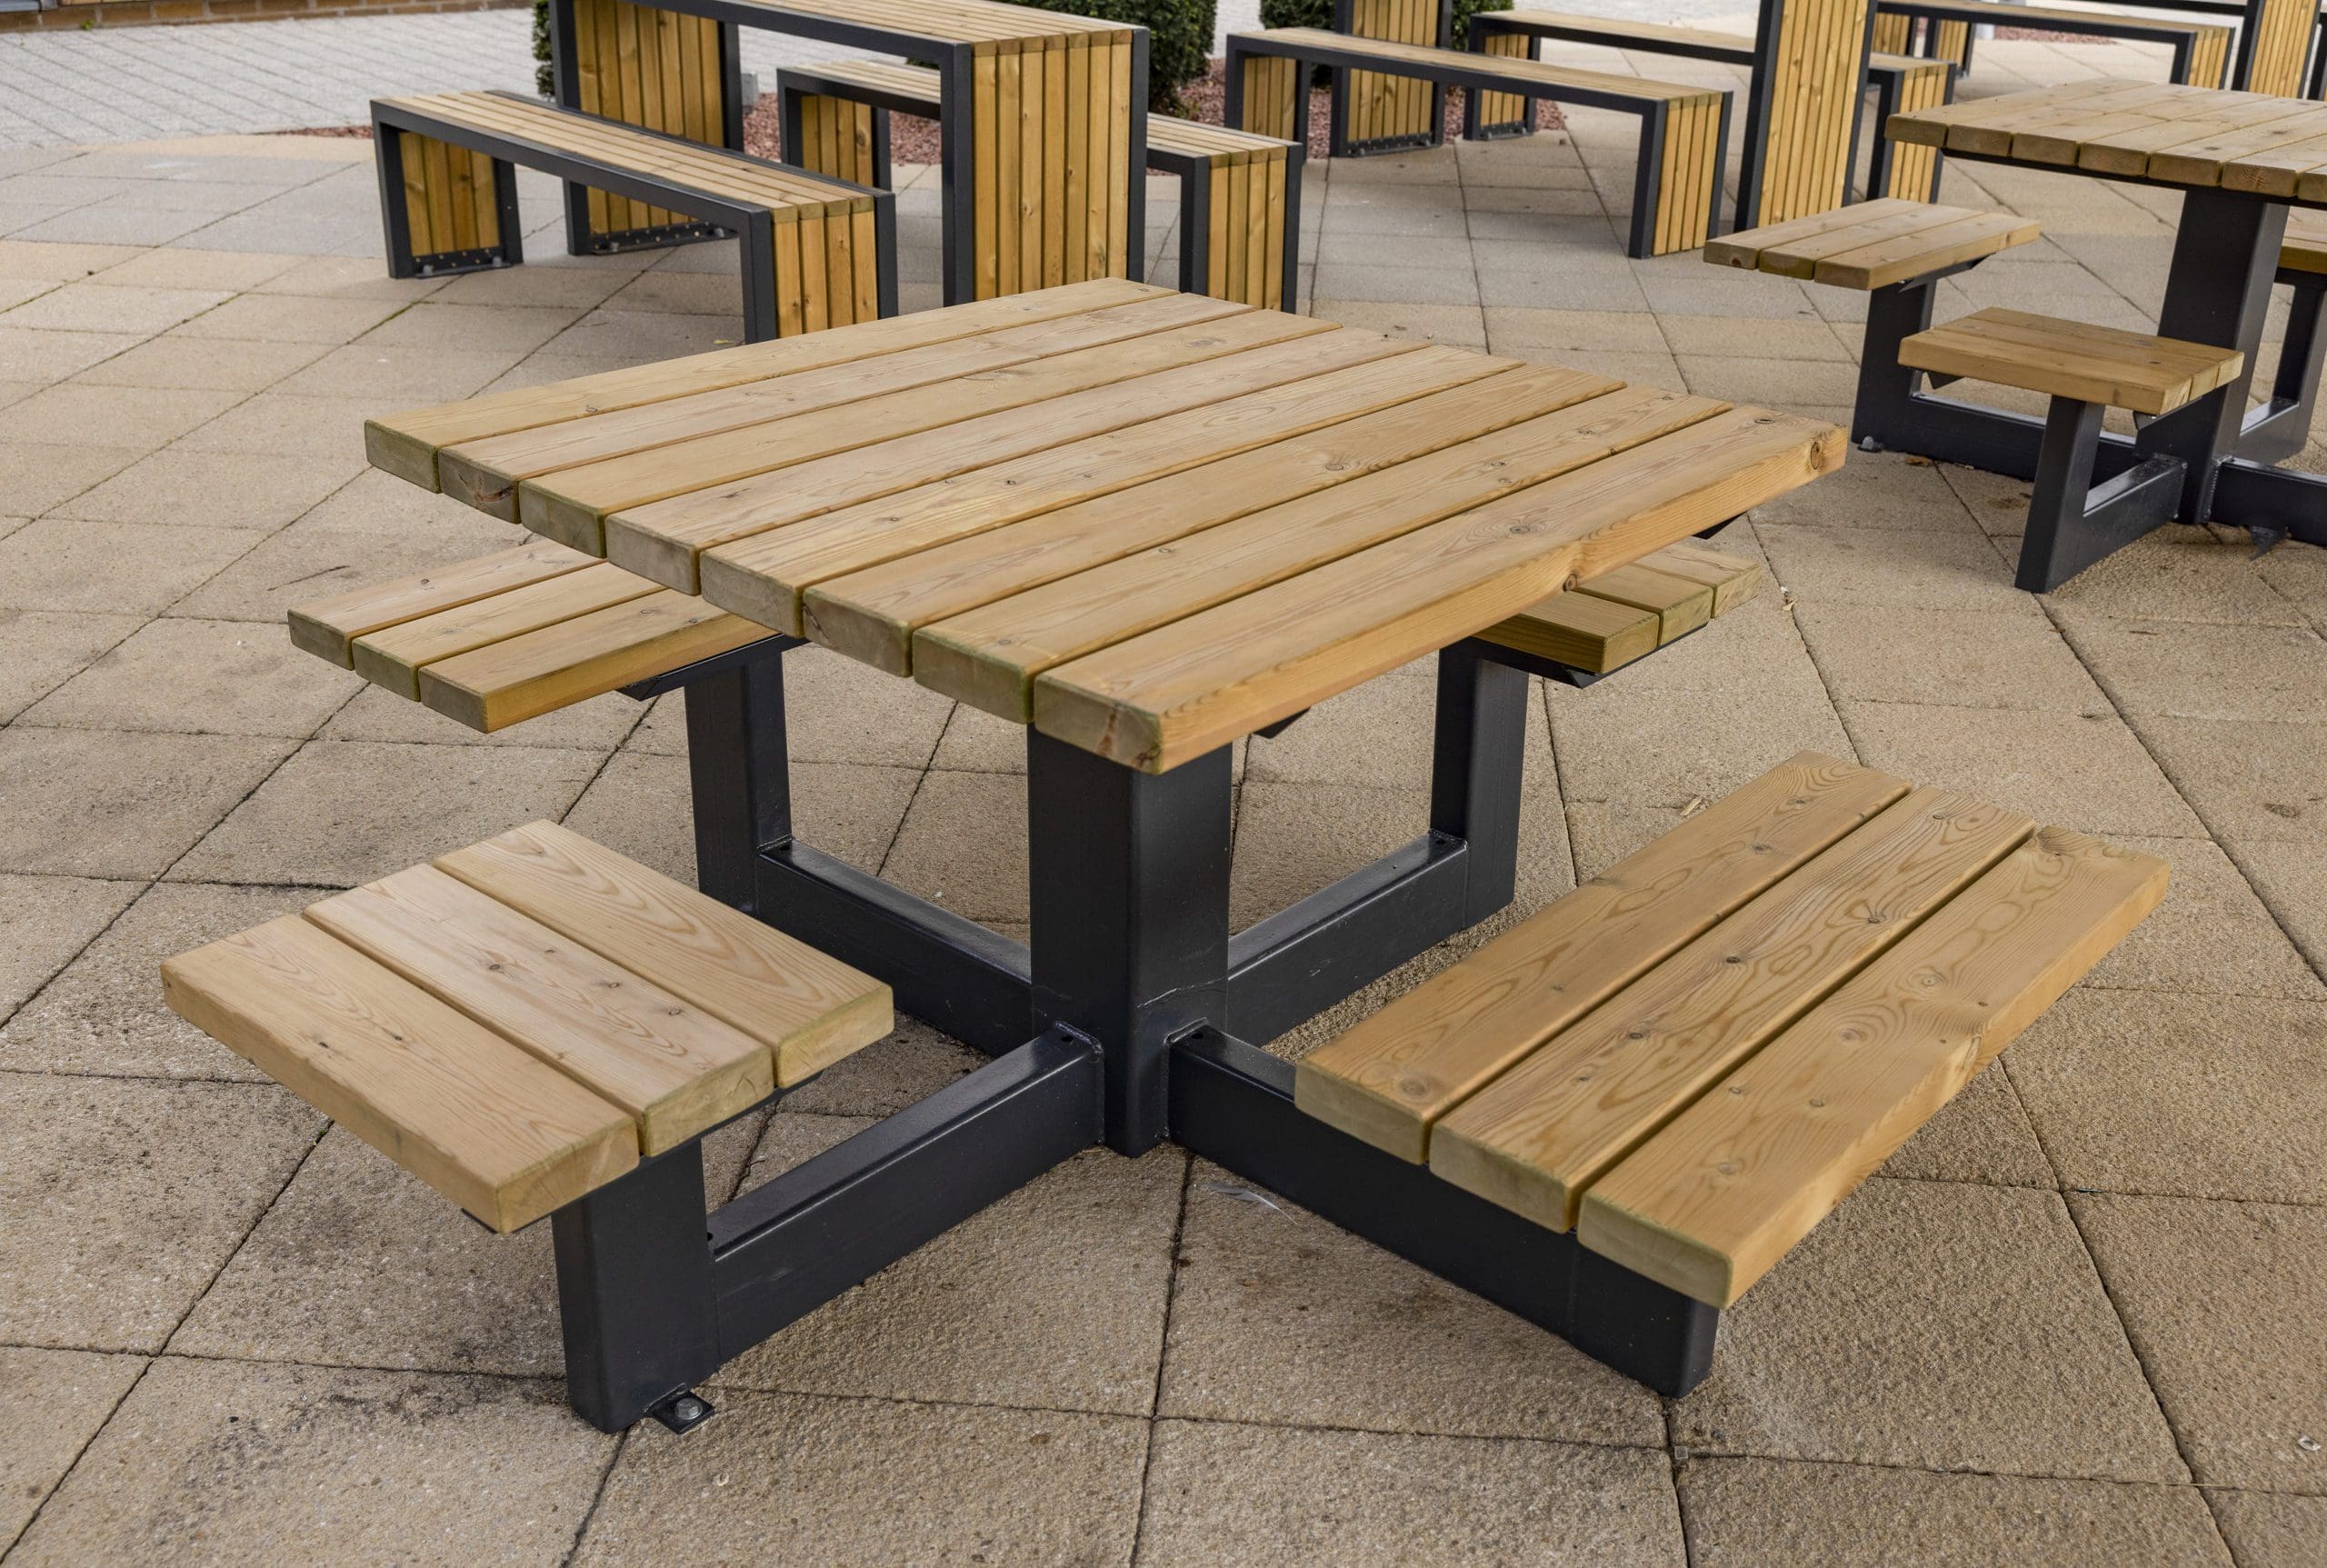 wooden-square-picnic-table-with-attached-seats